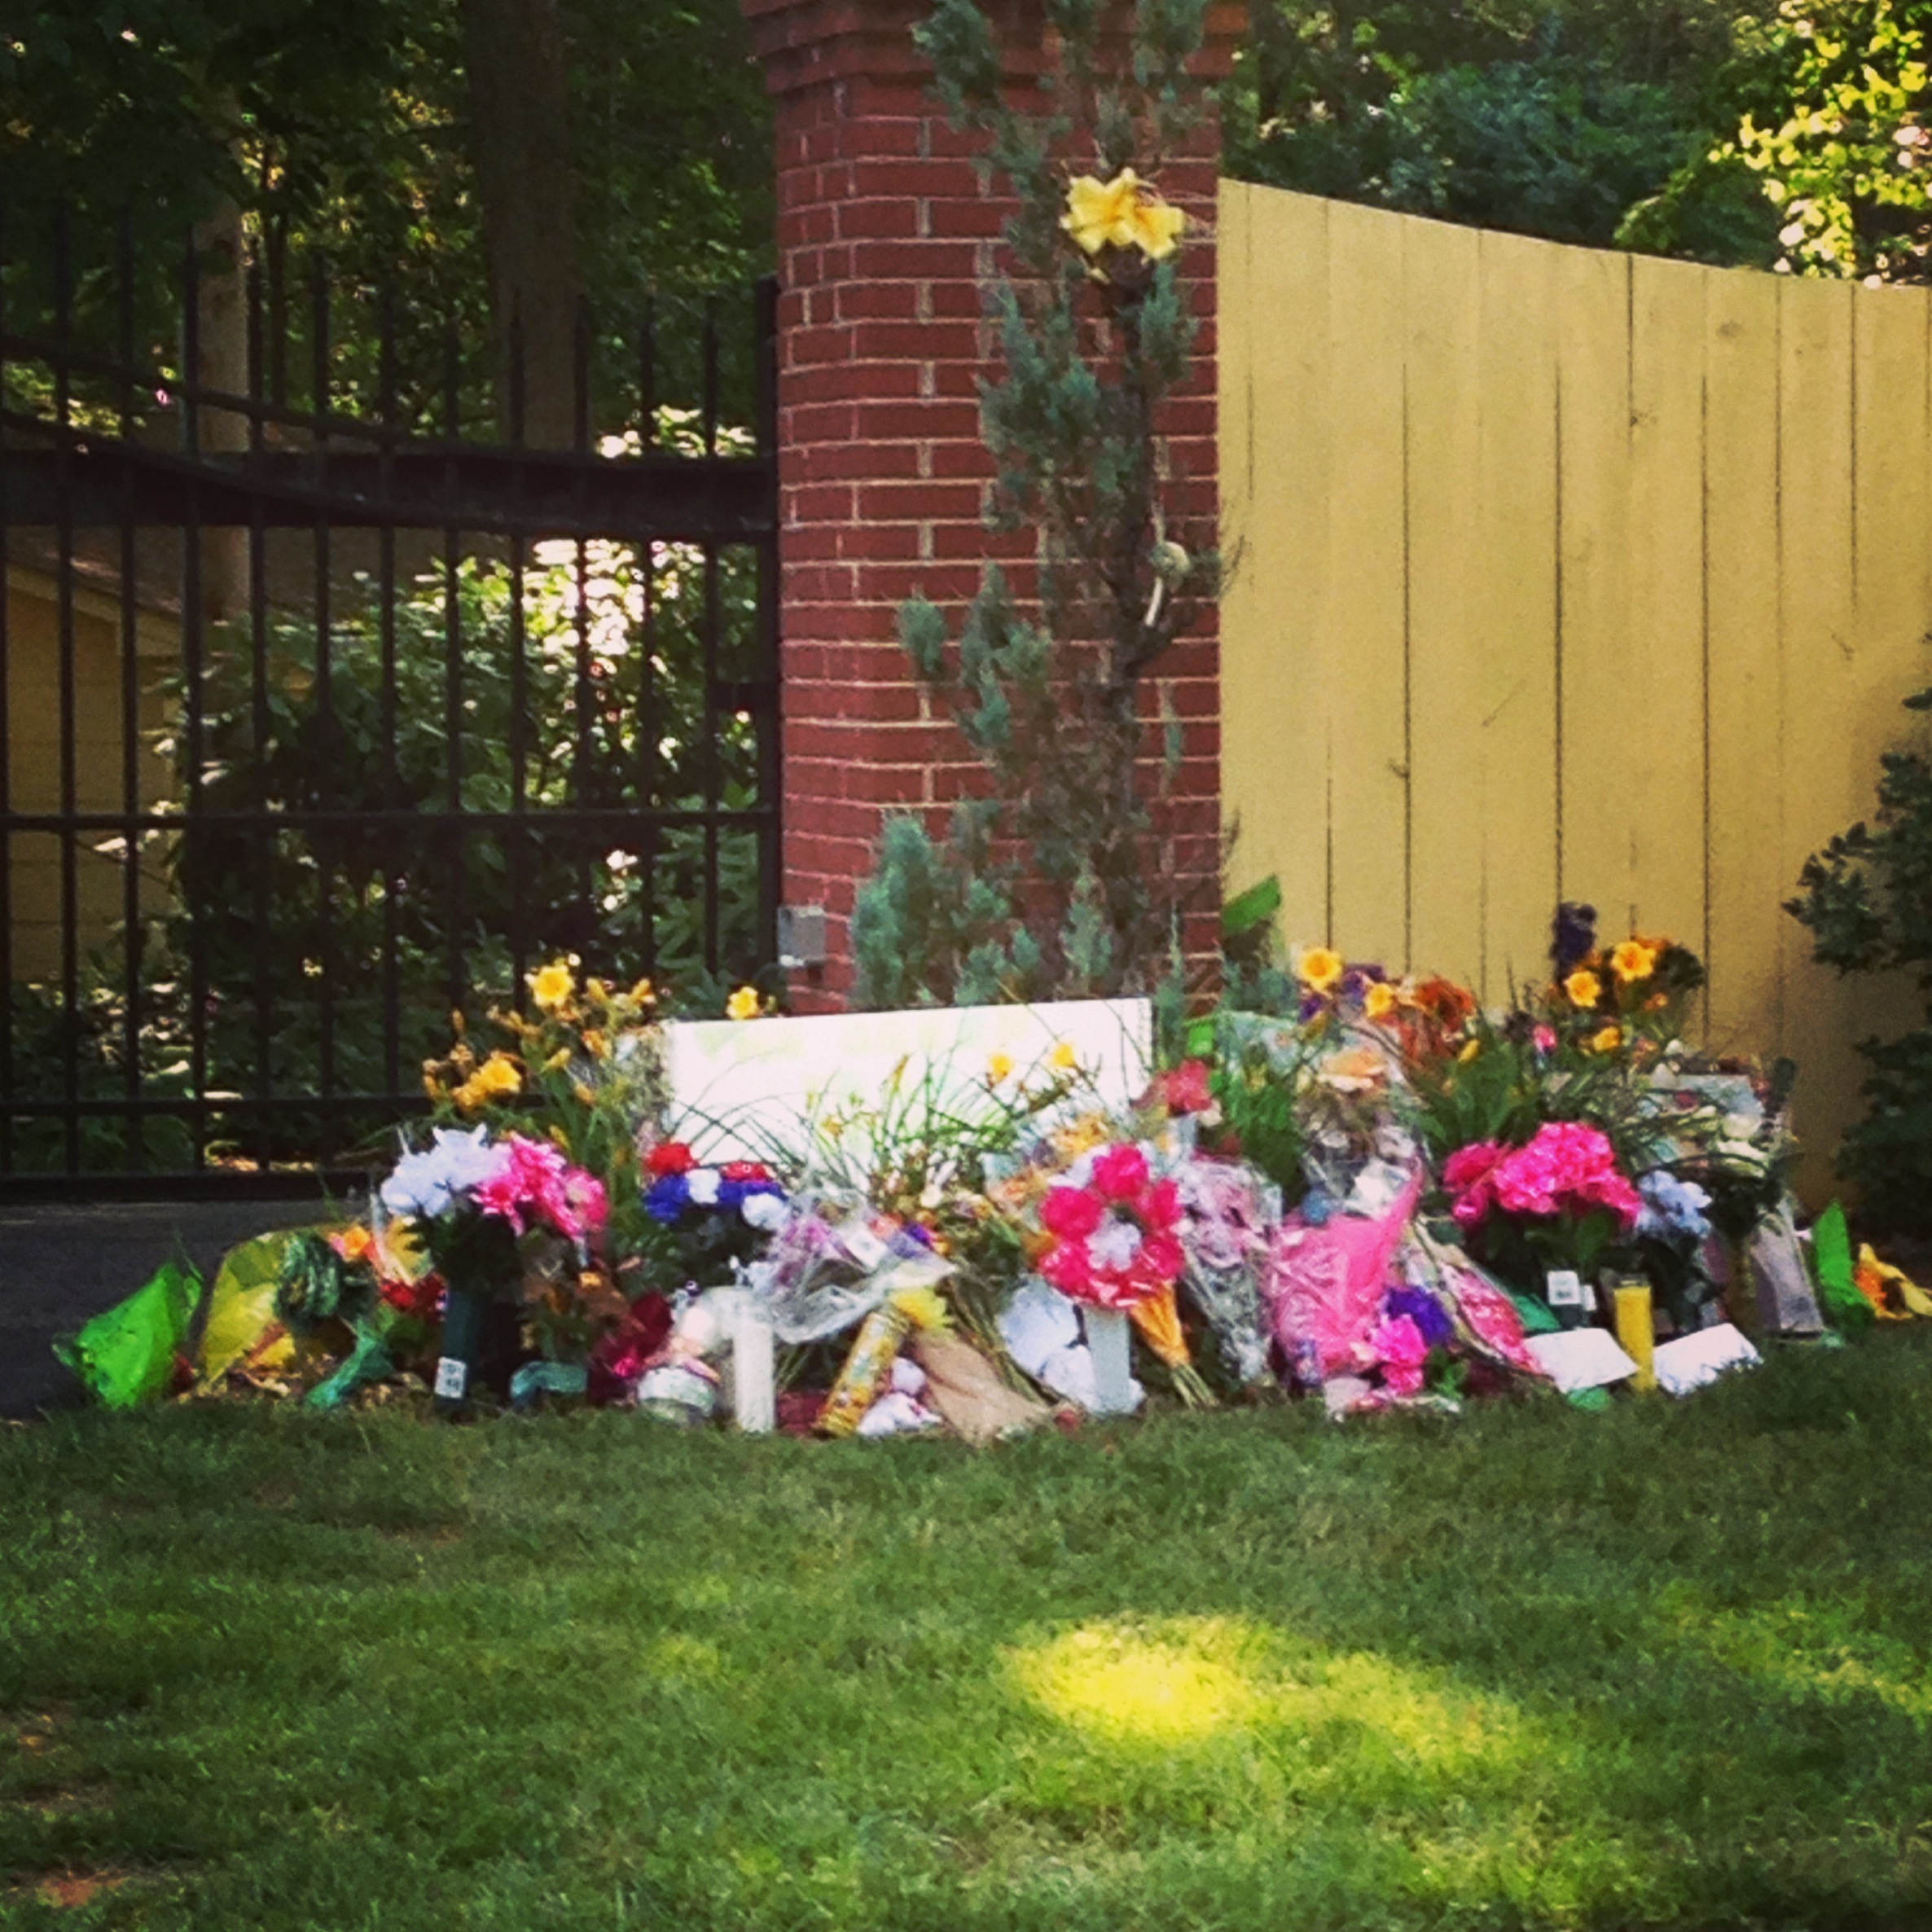 These gifts and flowers show just how much Dr. Angelou was loved and appreciated by friends and family in the Winston-Salem community.